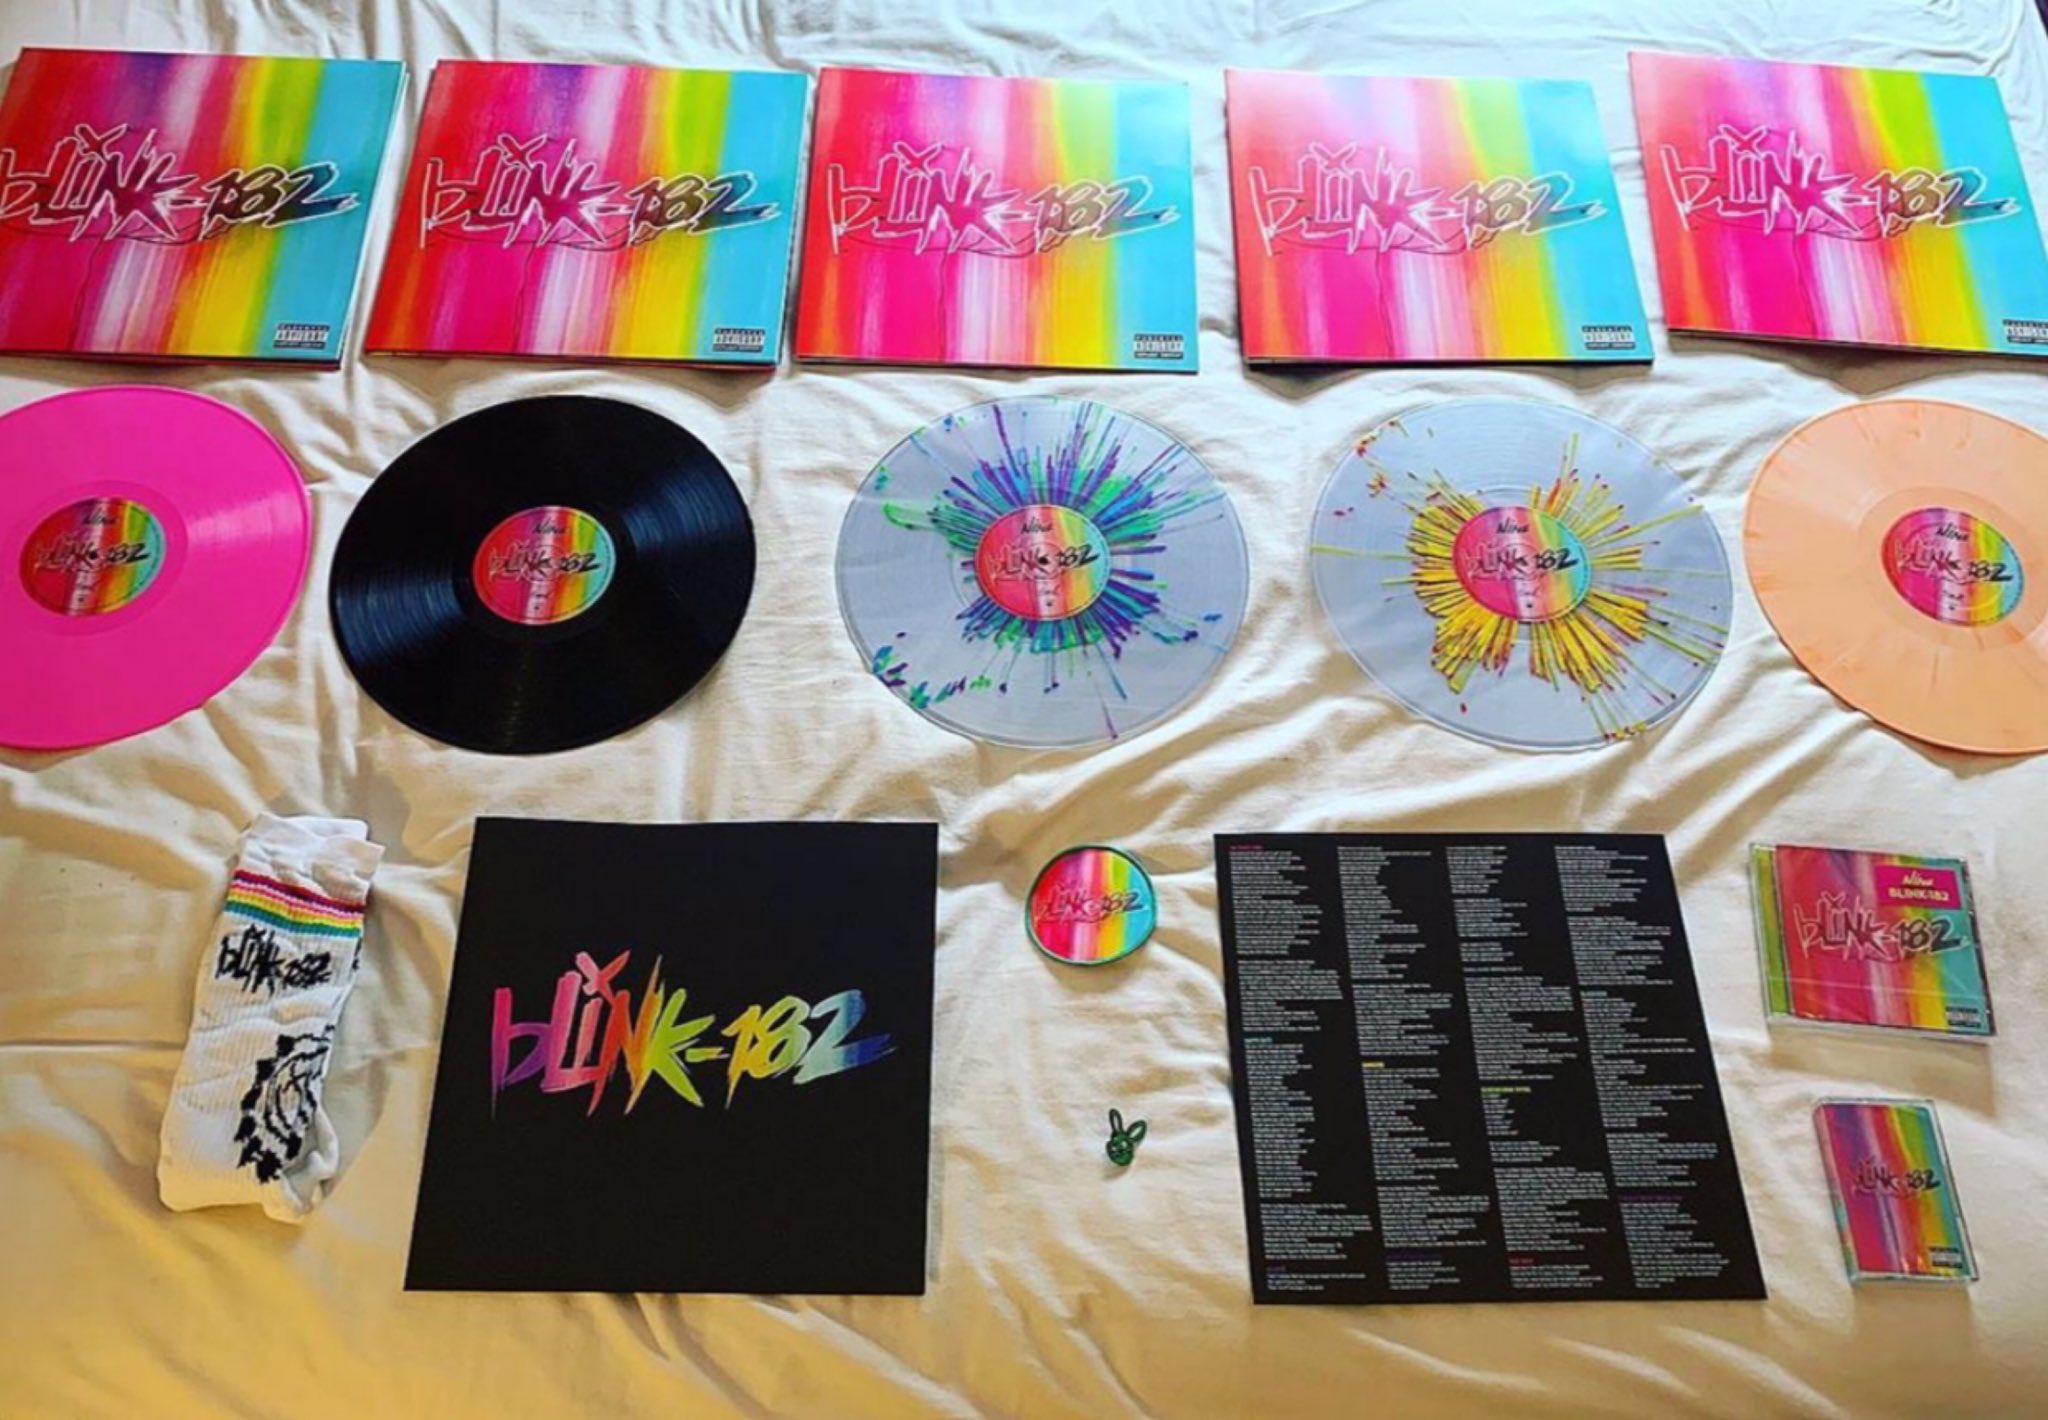 X 上的blink-182：「Our NINE vinyl variants are moving fast. Stock of all 4  types (excl black) are starting to run low - don't sleep on these  collectibles! 📀 #blink182NINE    /